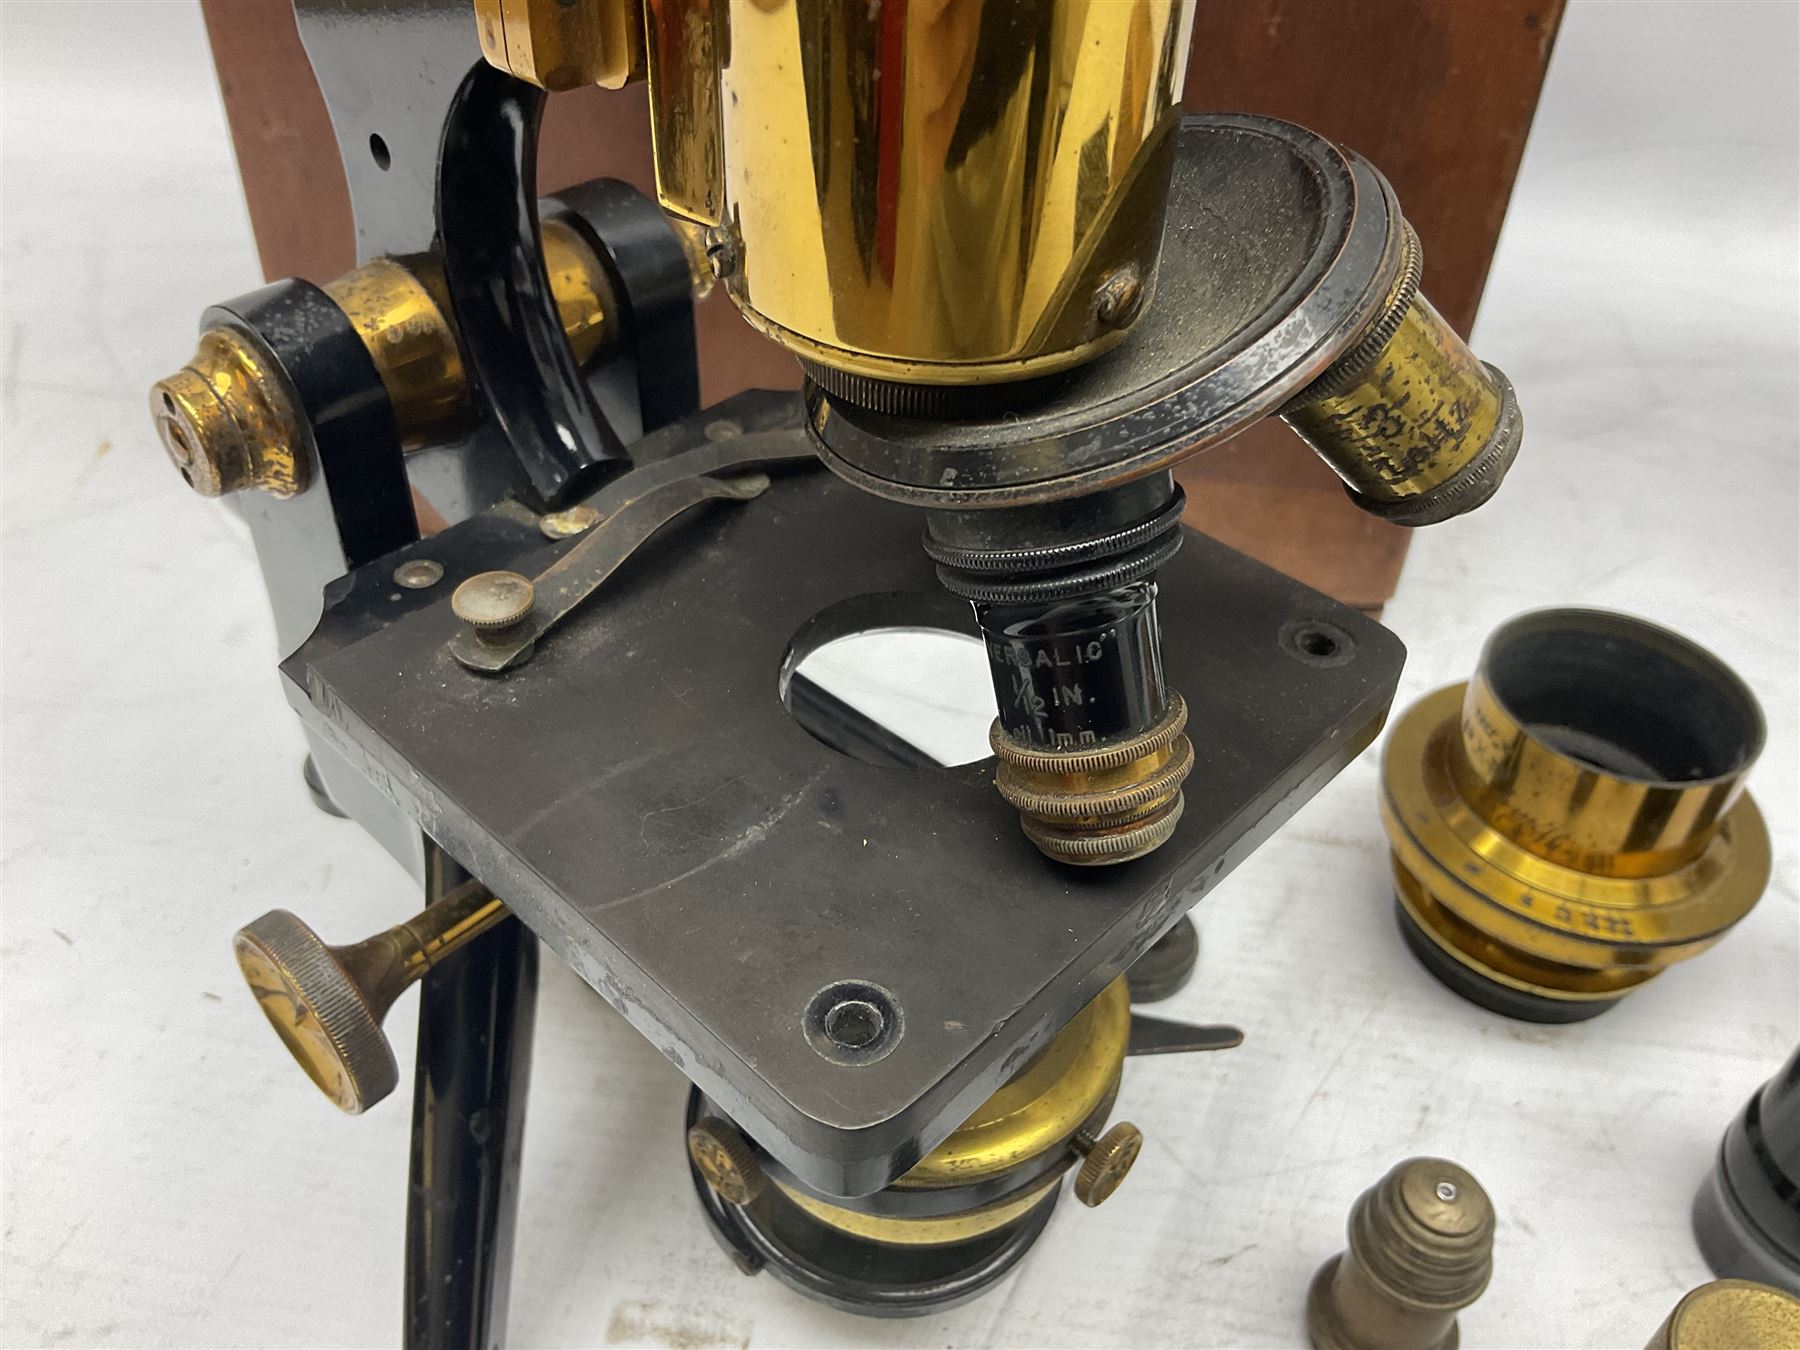 19th century brass and black japanned monocular microscope by W. Watson & Sons Ltd. 313 High Holborn - Image 3 of 15